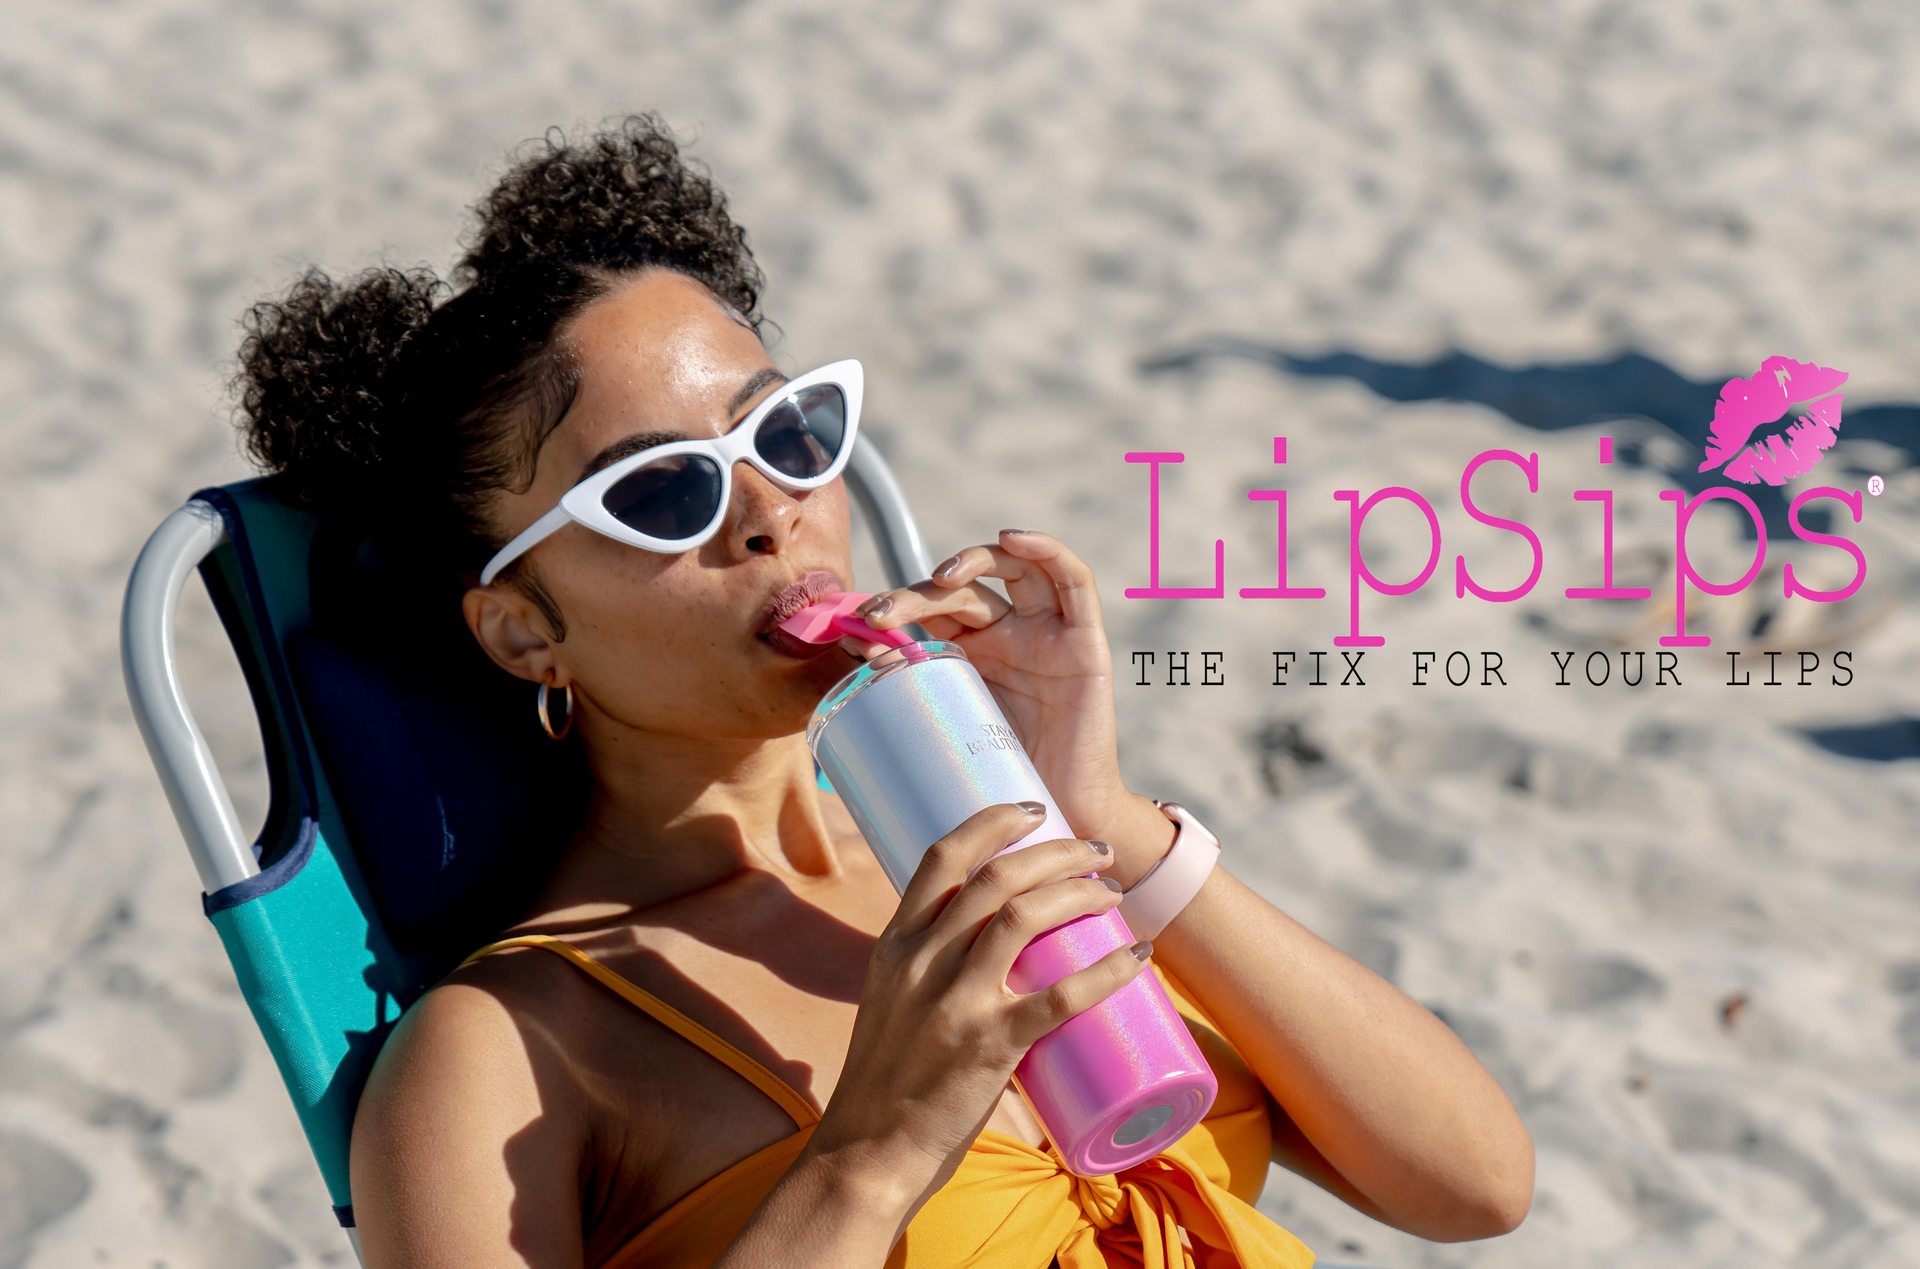 LipSips Lipsip Sip from A Straw Without Pursing Your Lips to Help Prevent Lip Lines Wrinkles Includes Detachable Lipsip, Reusable Sili, Blue